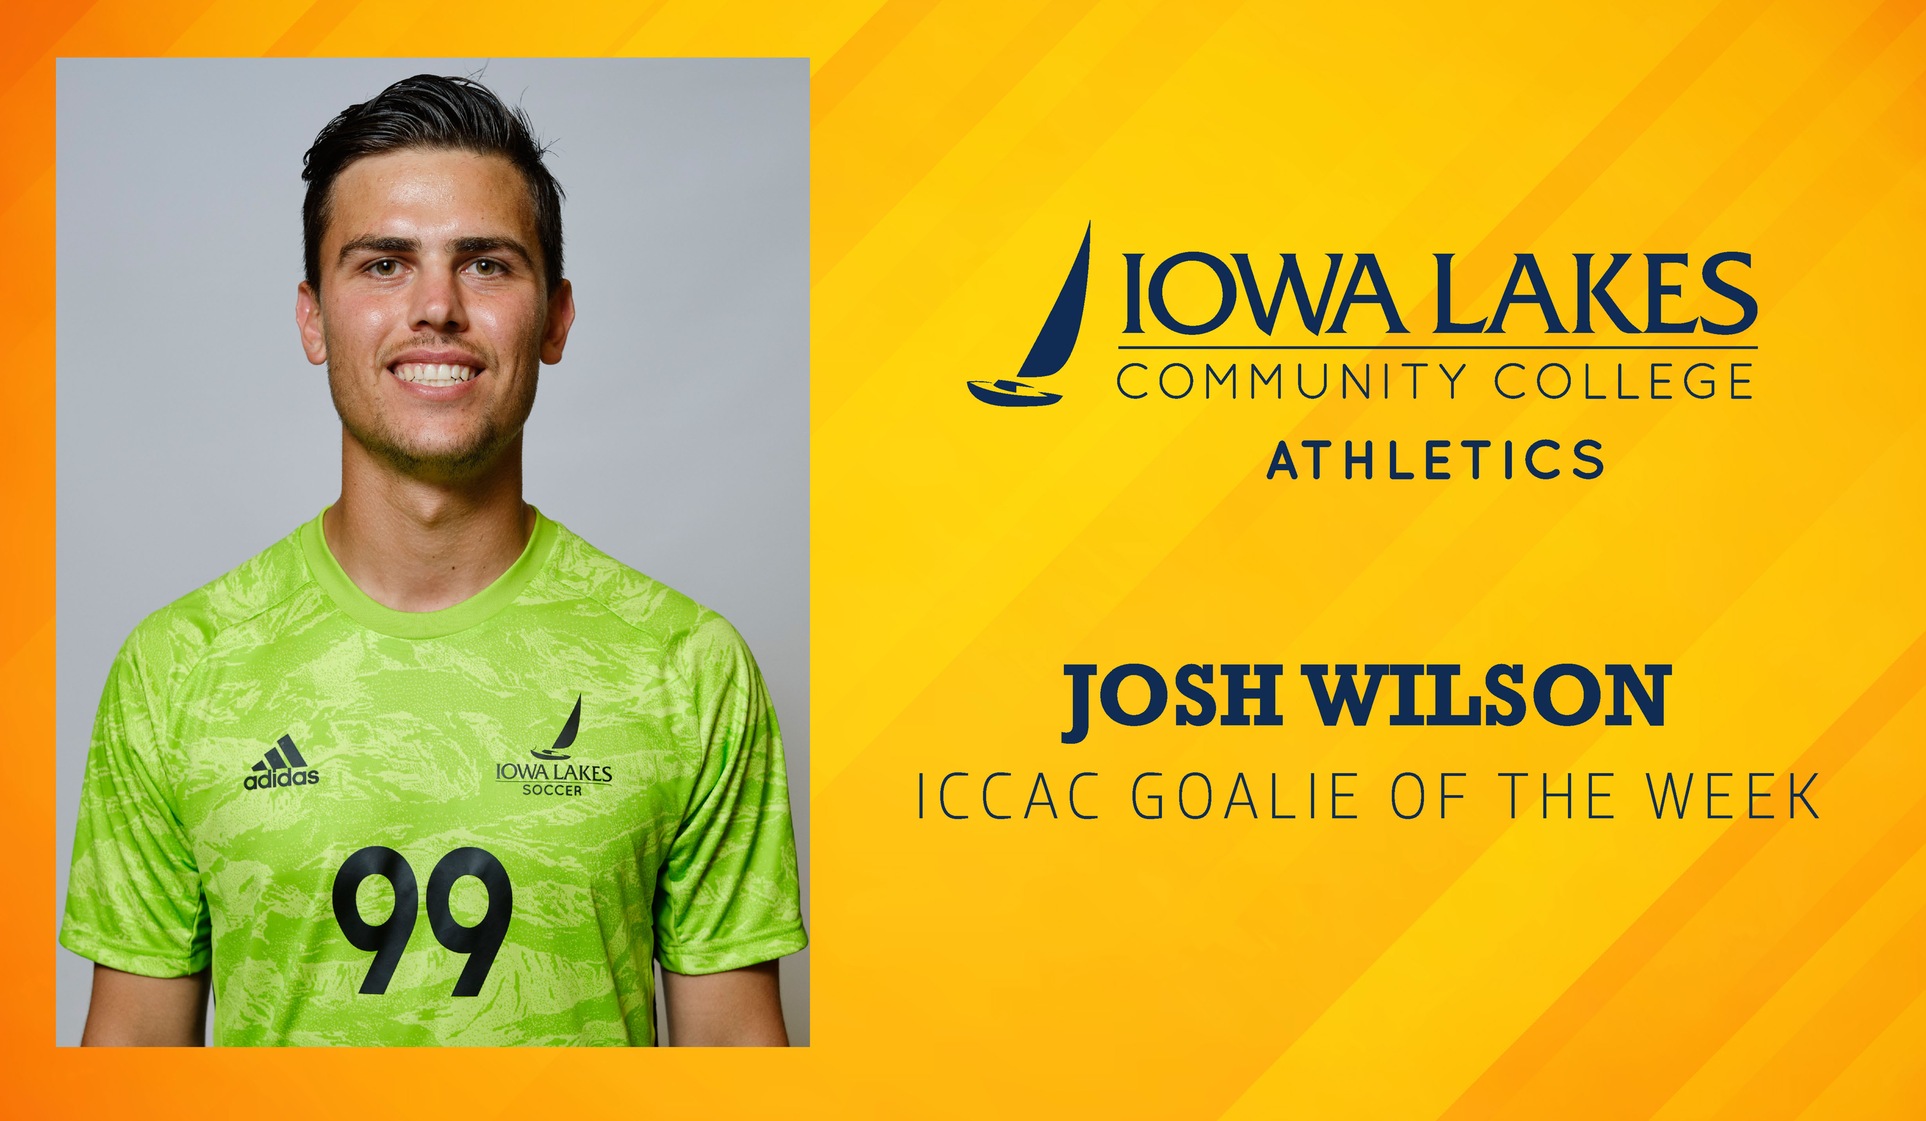 JOSH WILSON NAMED ICCAC GOALIE OF THE WEEK FOR THIRD TIME THIS YEAR